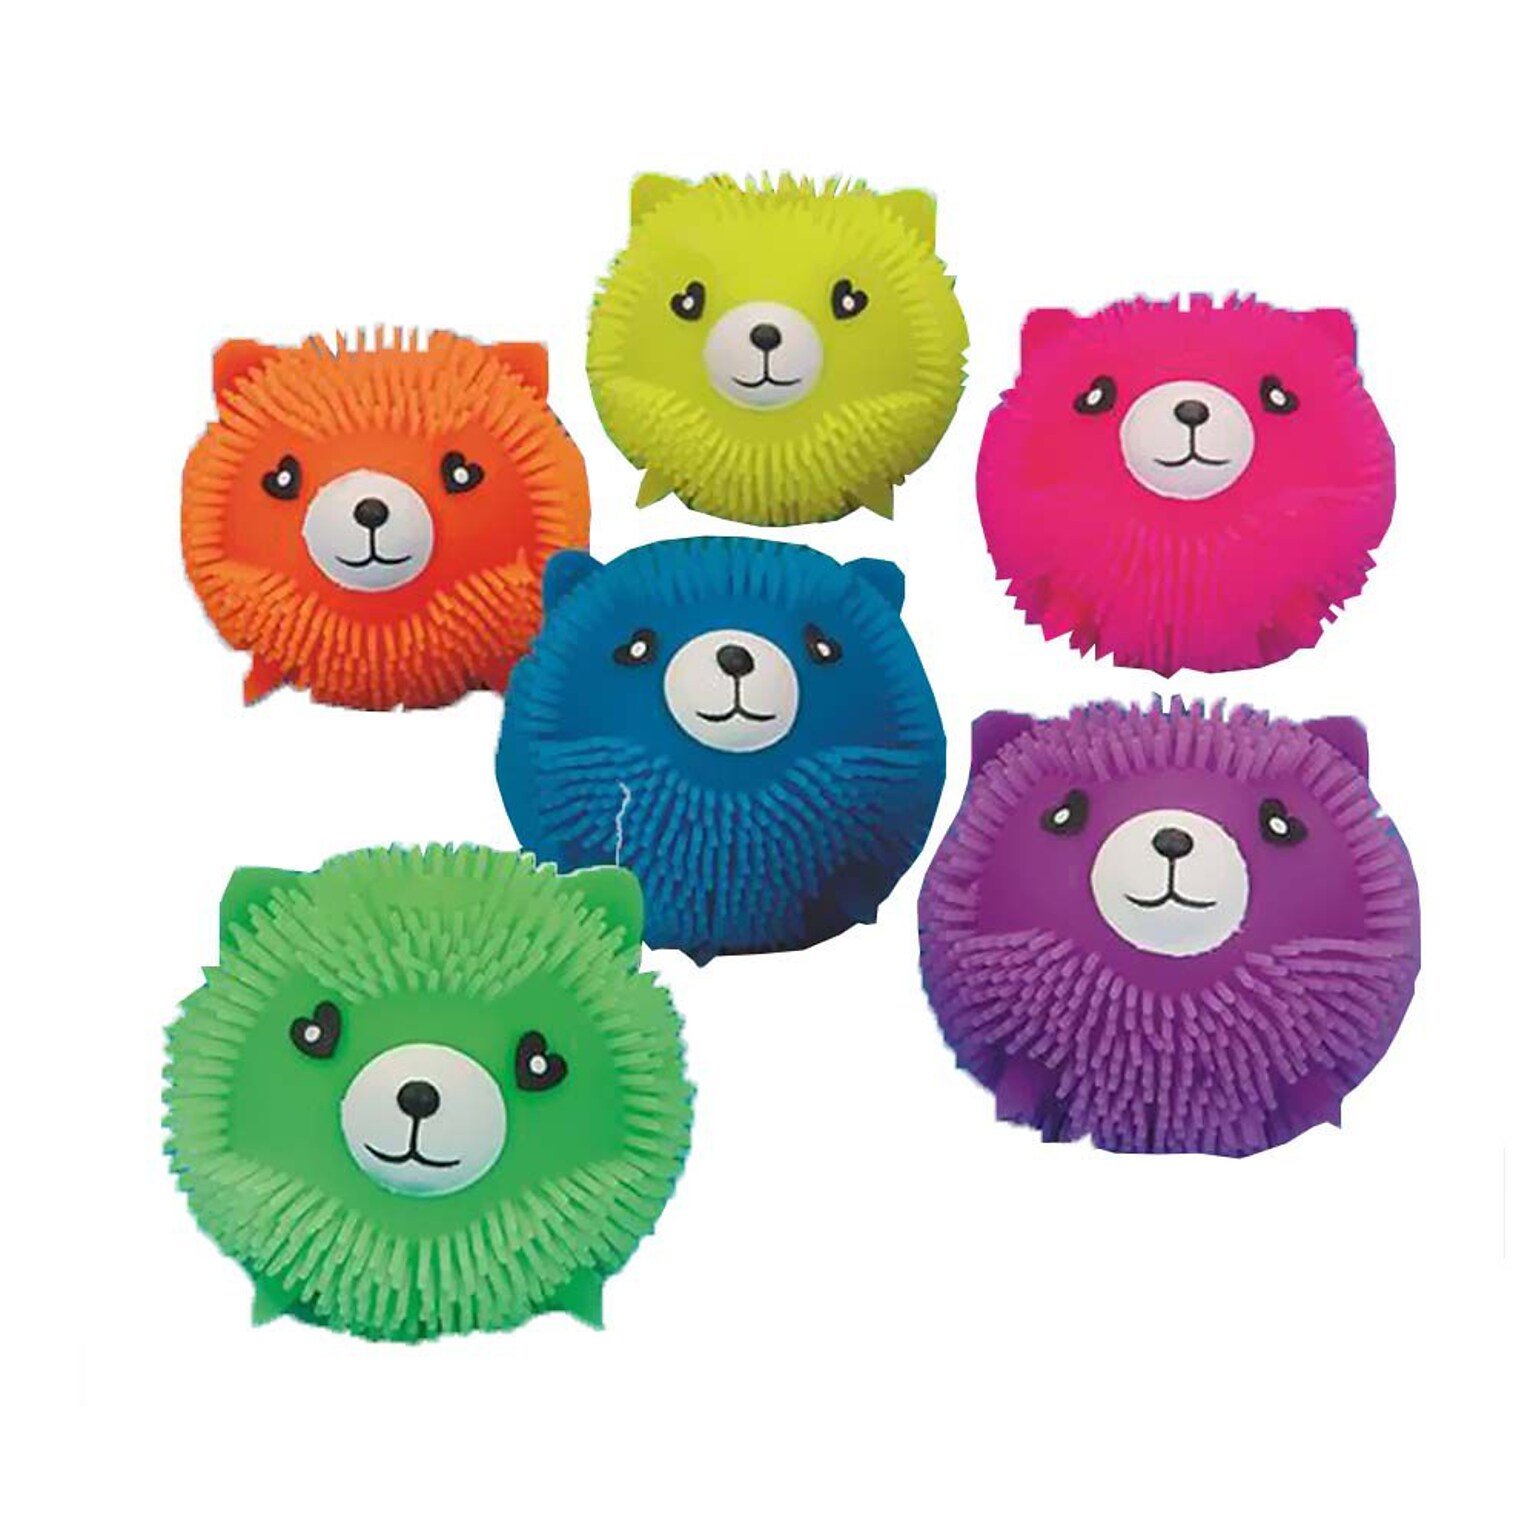 S&S Kitty Cat Puffer Balls, Assorted, 2.5, Multicolored, 6/Pack (SL5630)